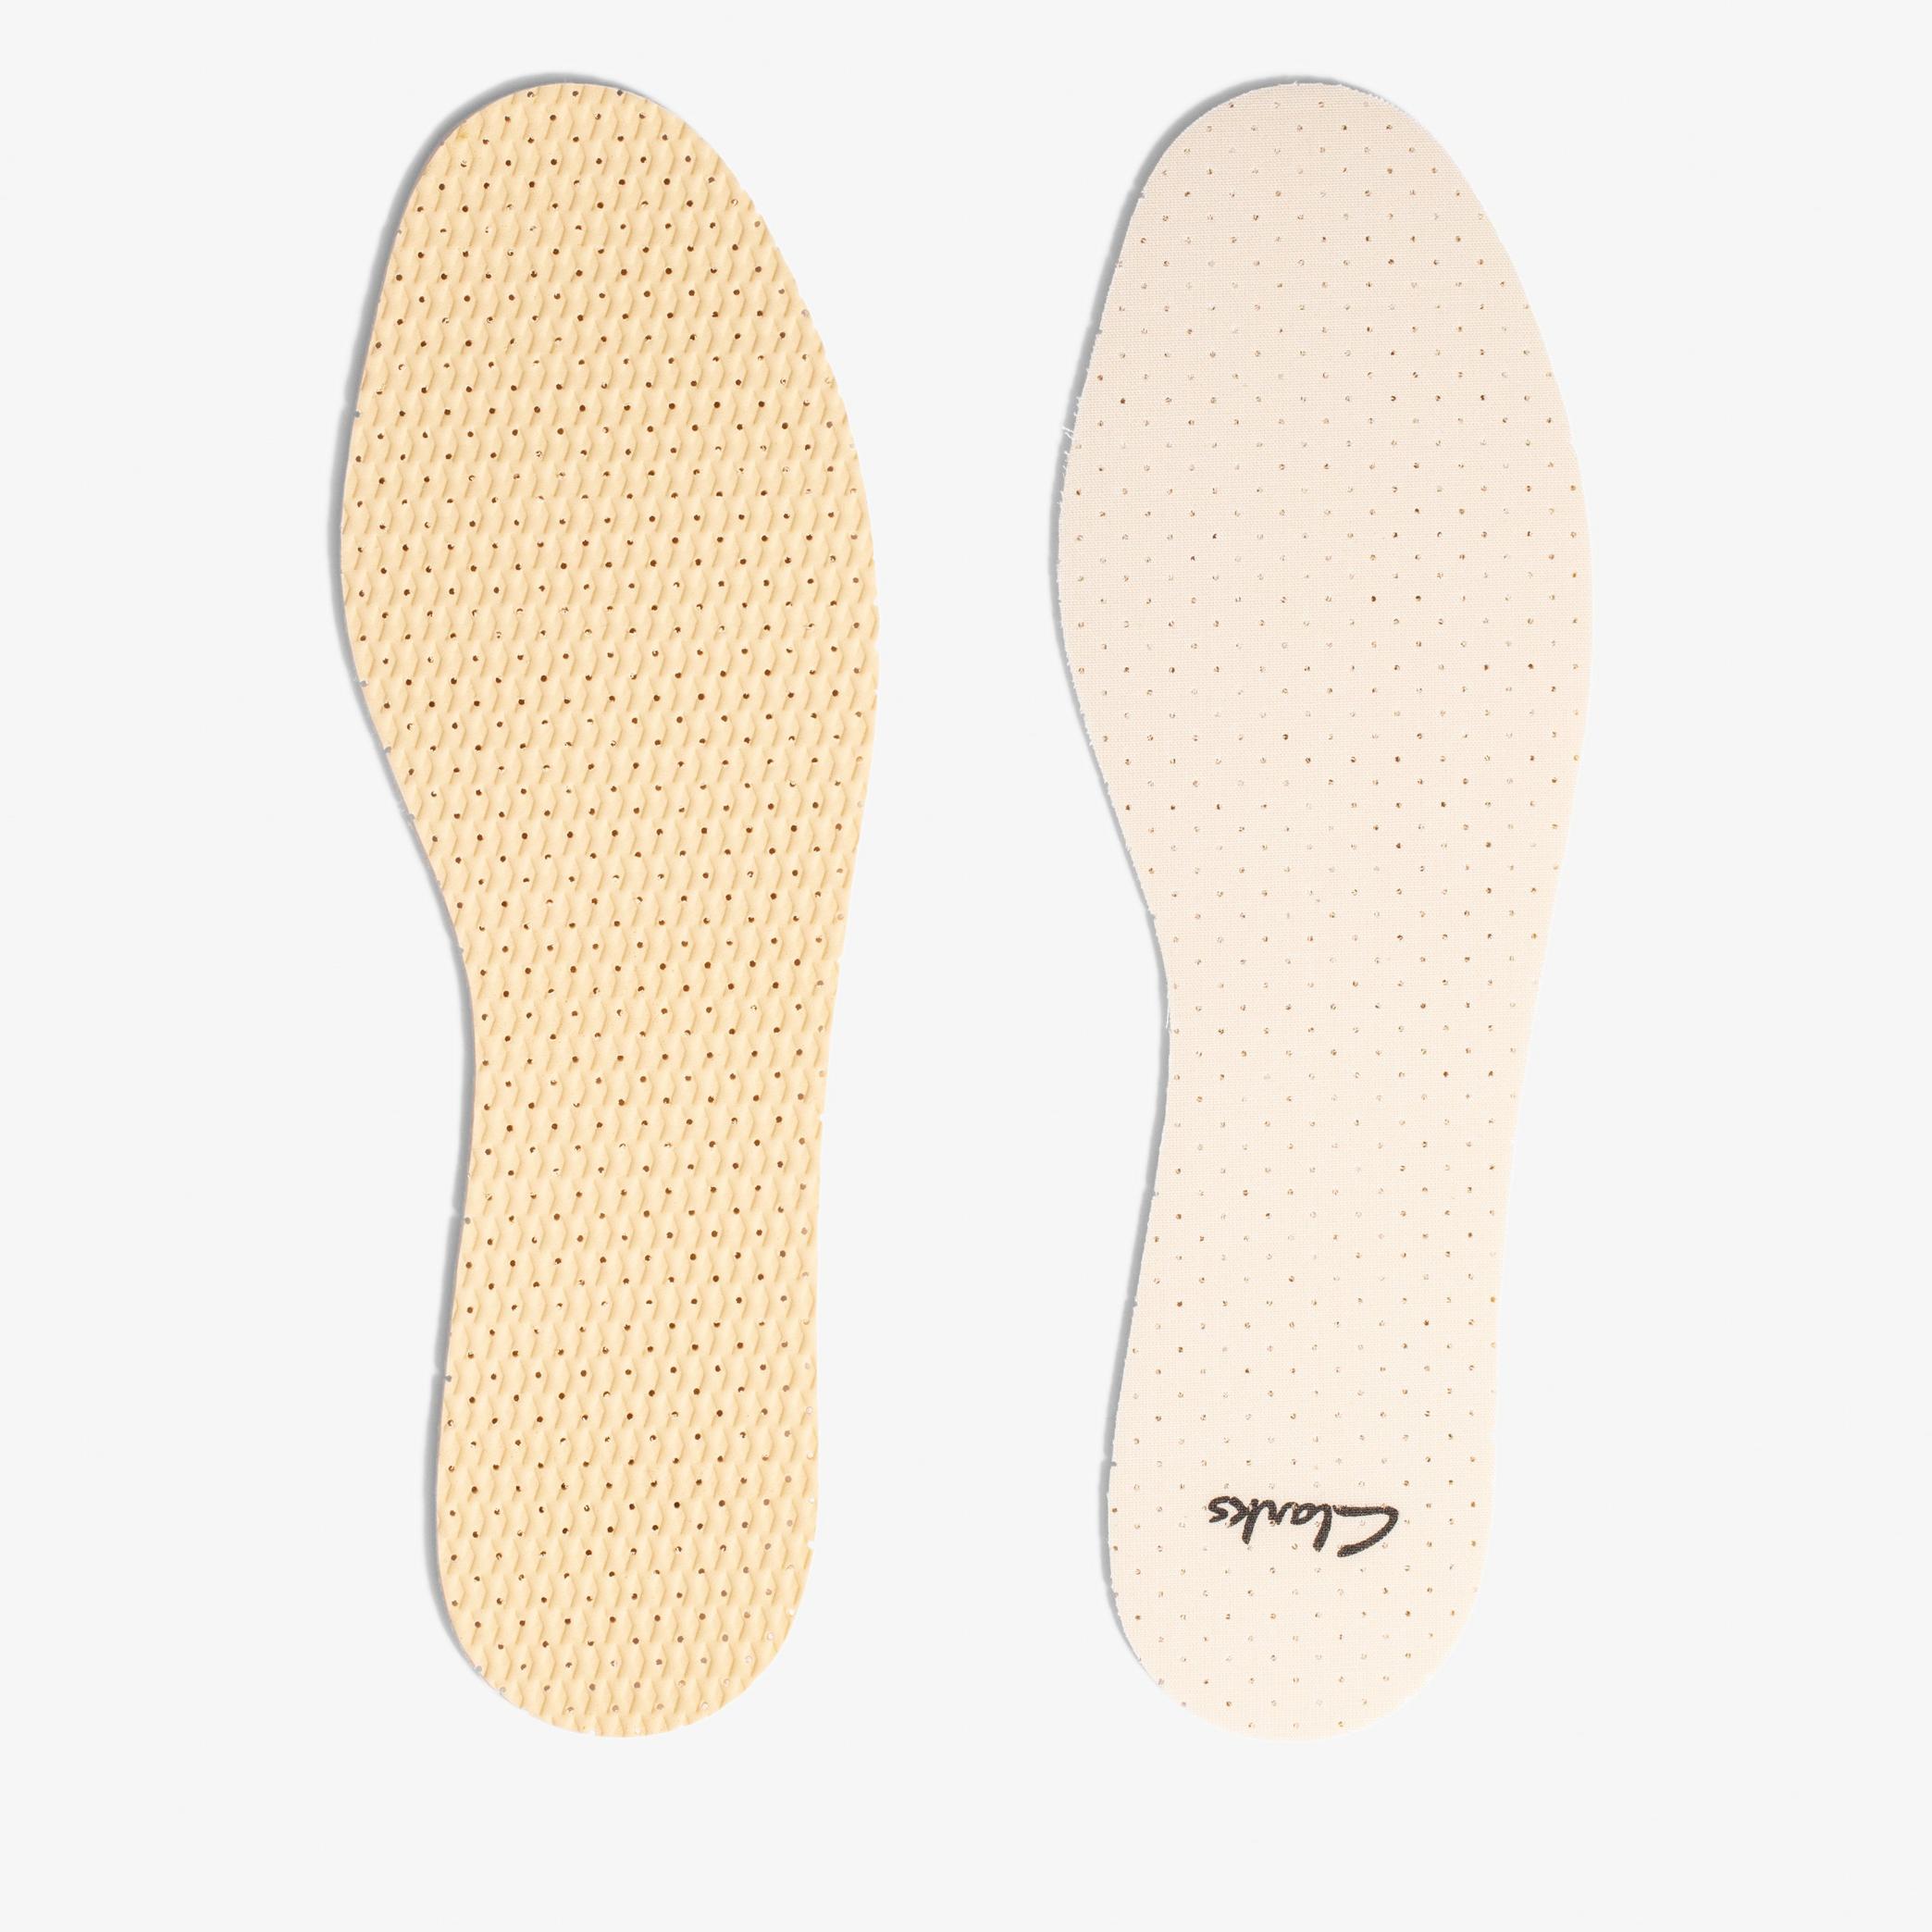 Foam Insole Size 11-12  Insoles, view 3 of 3